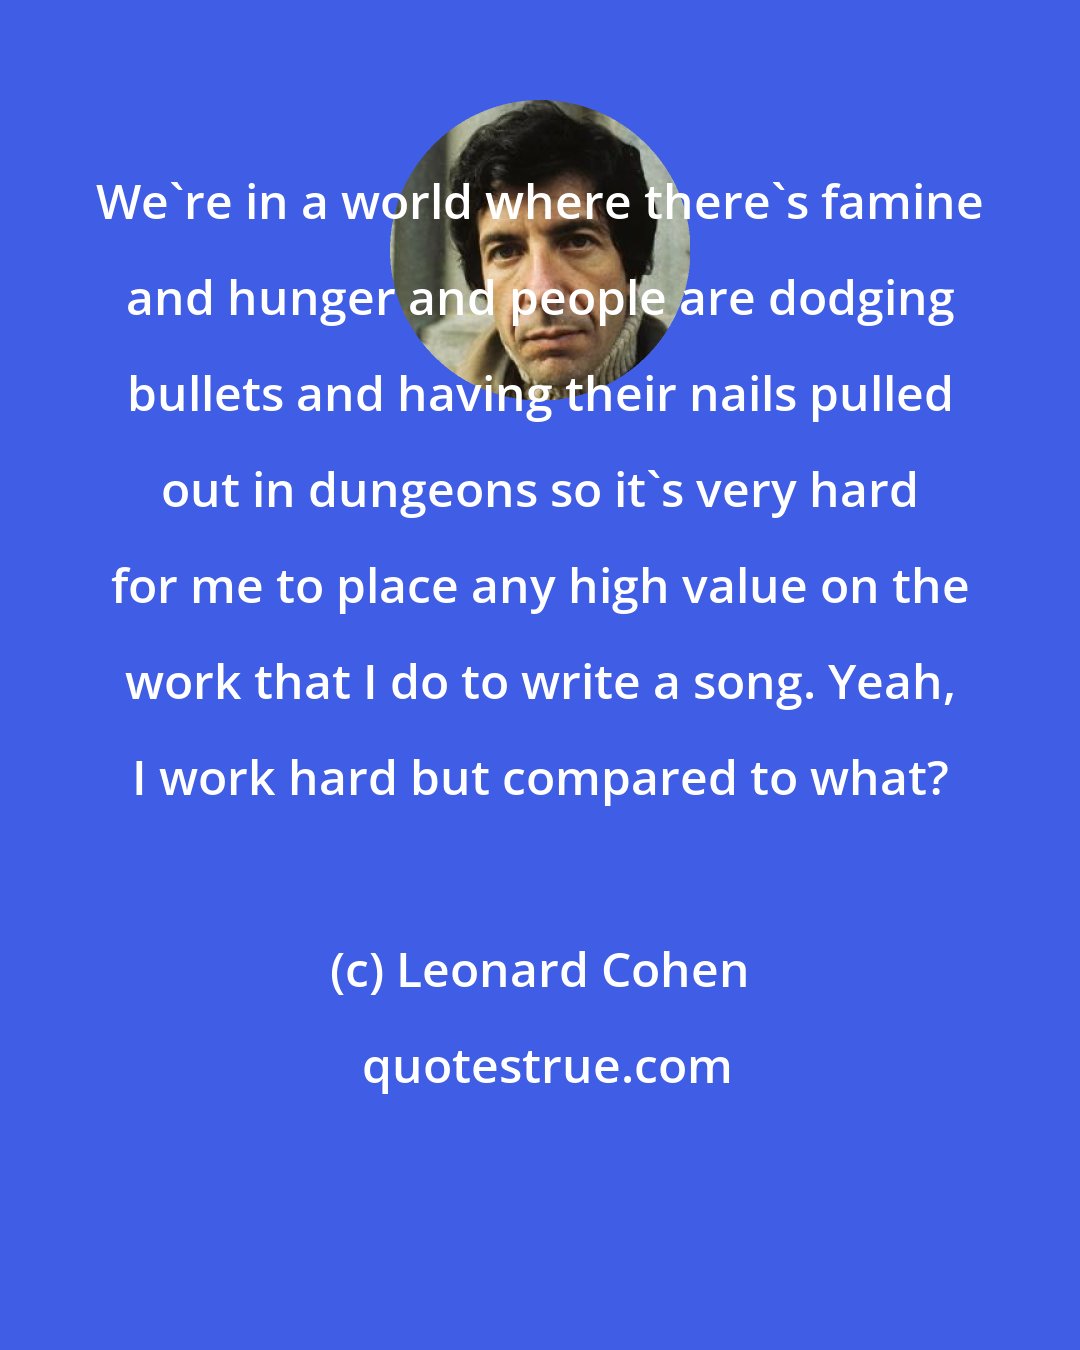 Leonard Cohen: We're in a world where there's famine and hunger and people are dodging bullets and having their nails pulled out in dungeons so it's very hard for me to place any high value on the work that I do to write a song. Yeah, I work hard but compared to what?